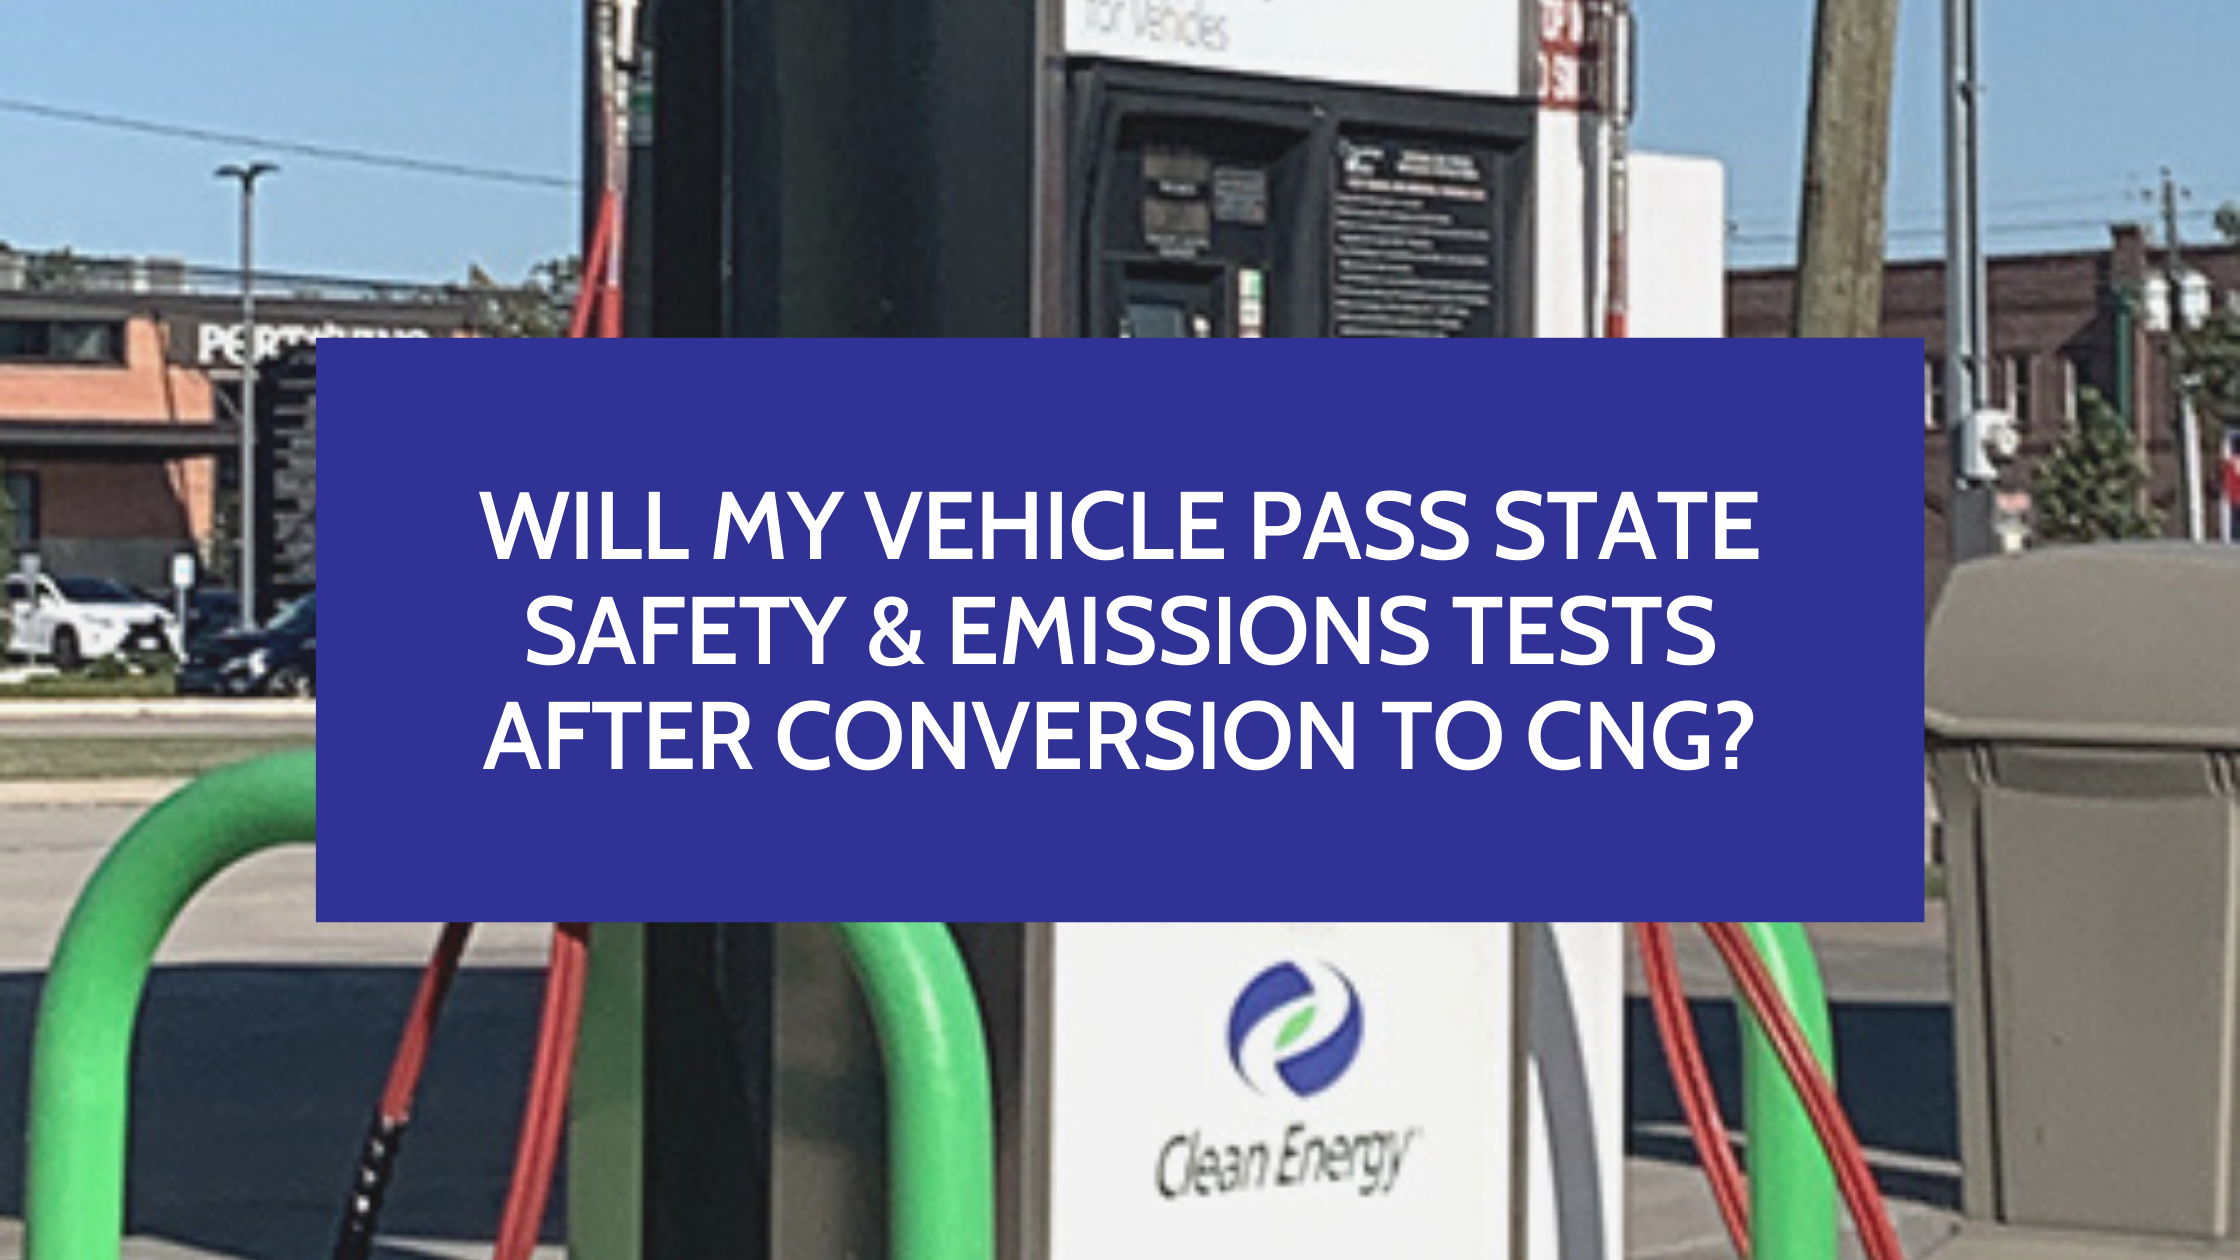 Will my Vehicle Pass State Safety & Emissions Tests after Conversion to CNG?